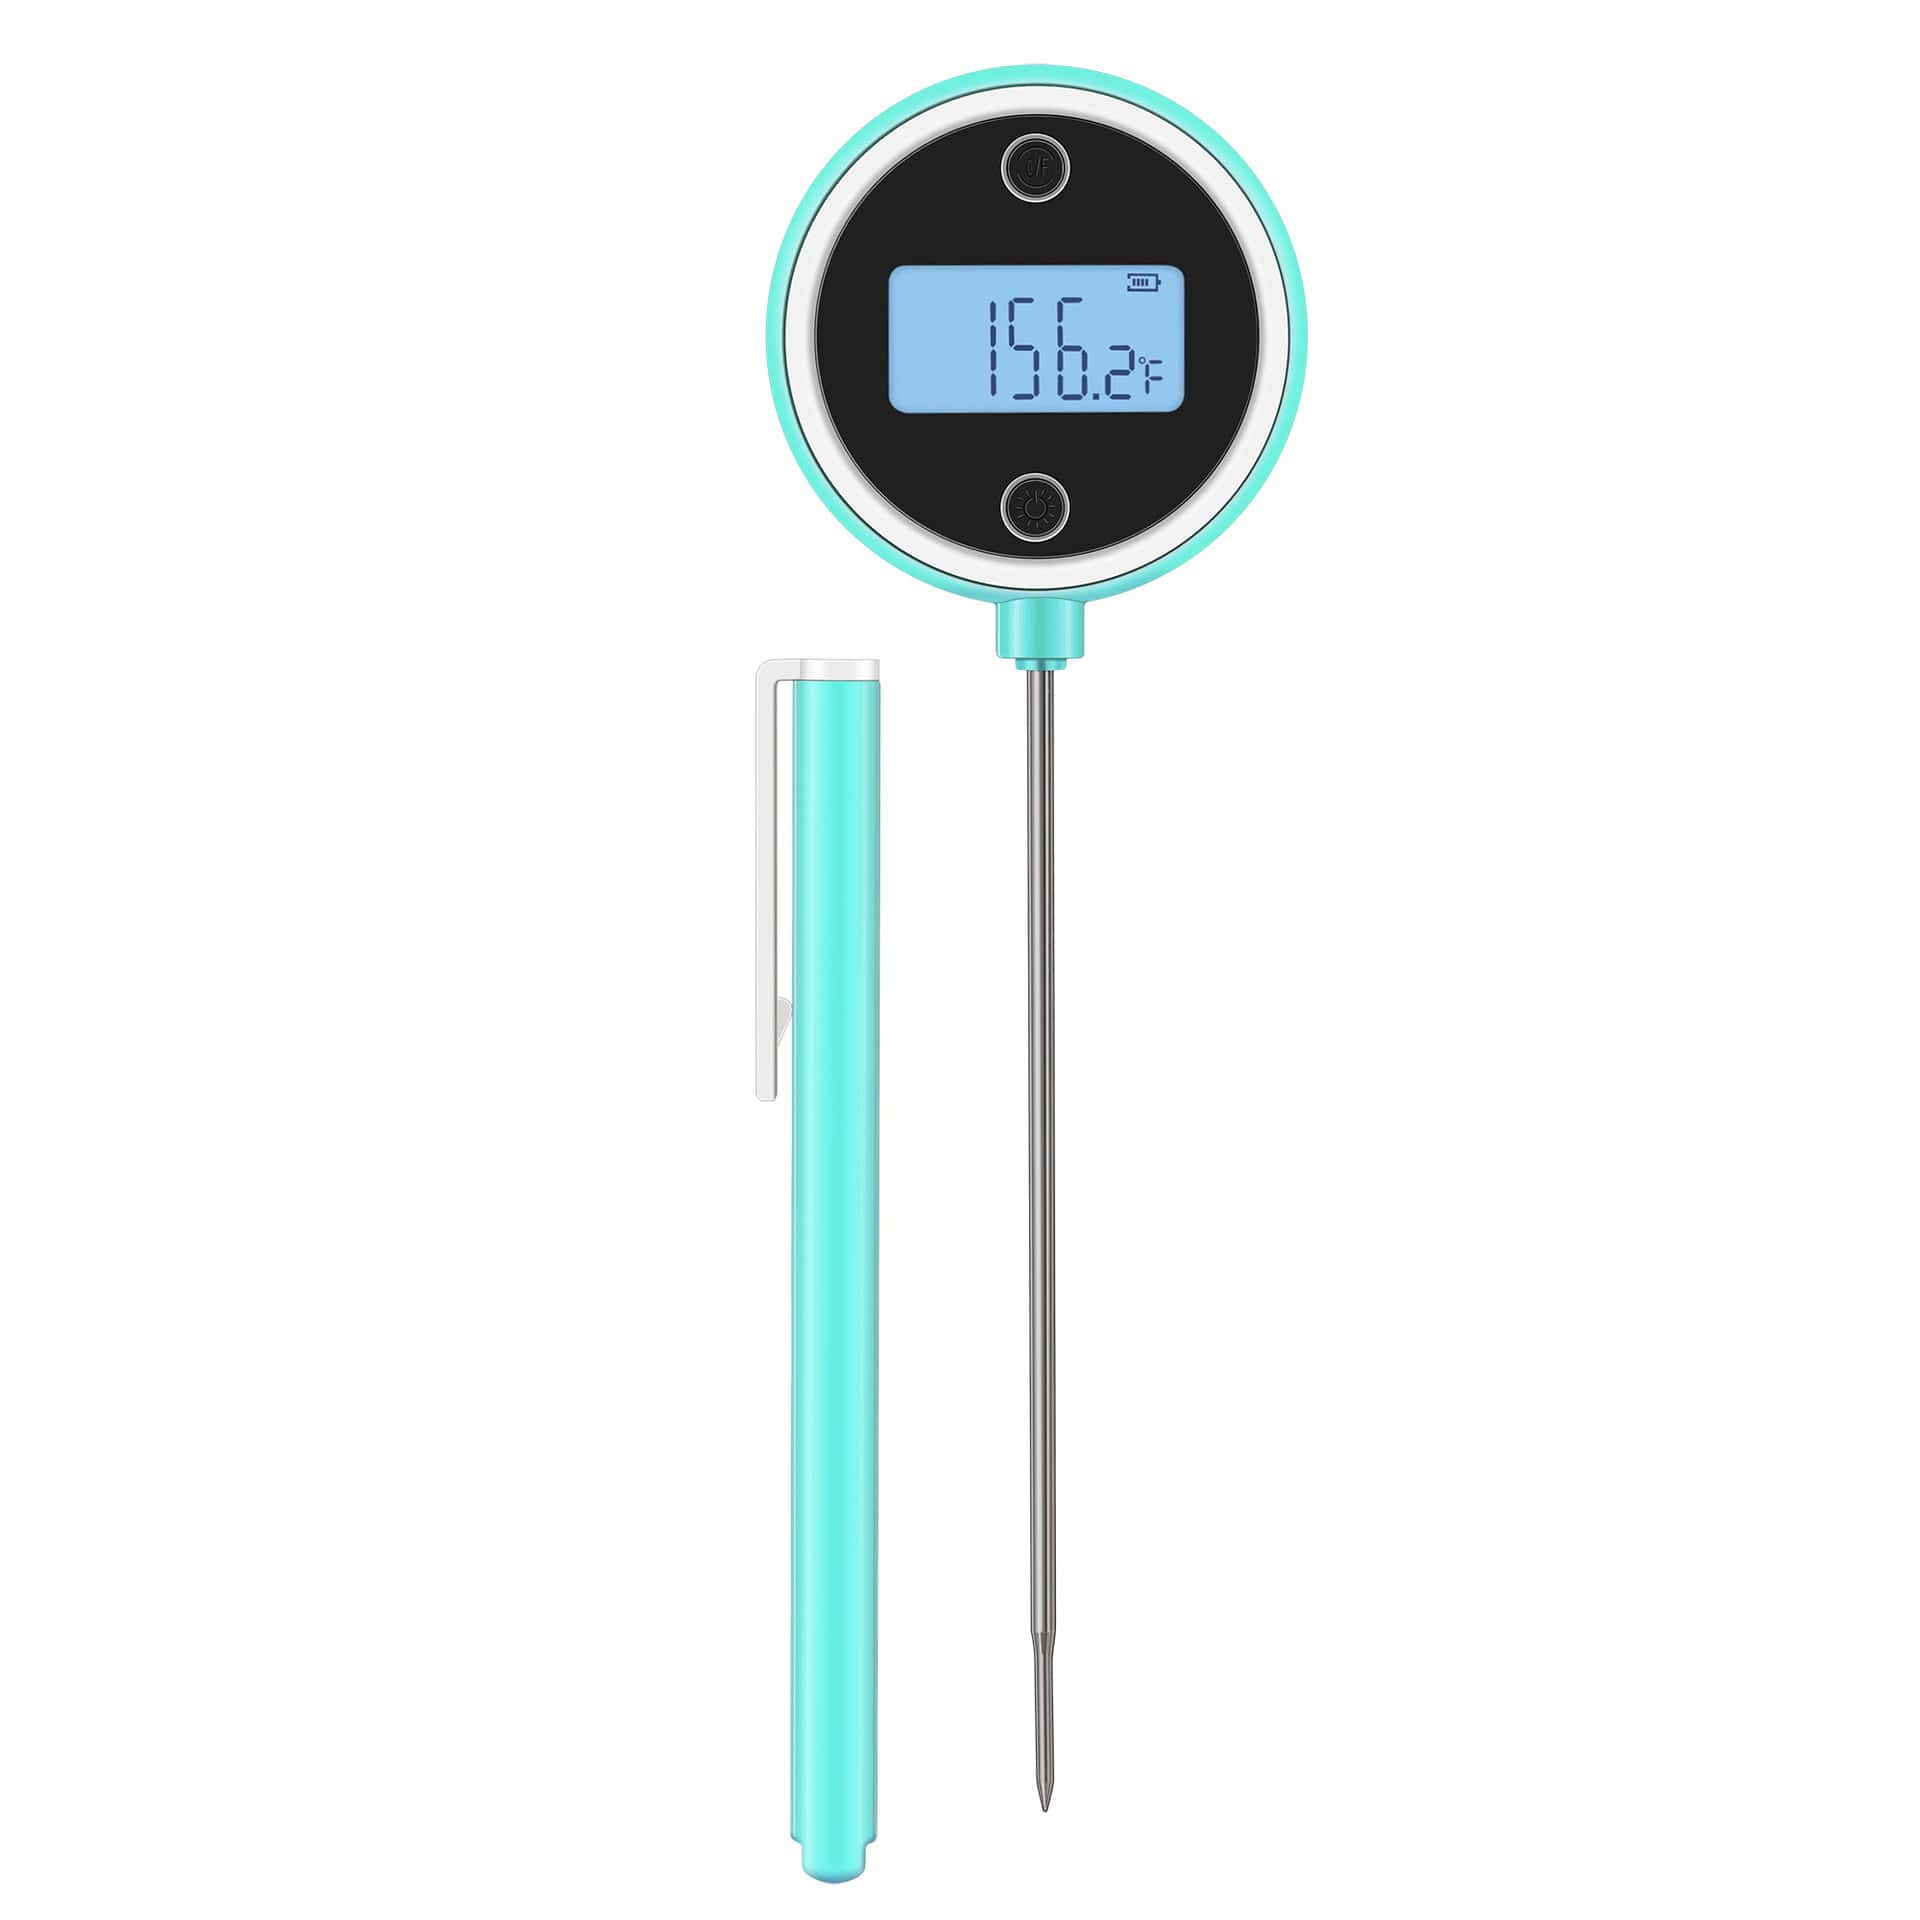 The Best Meat Thermometers in 2022